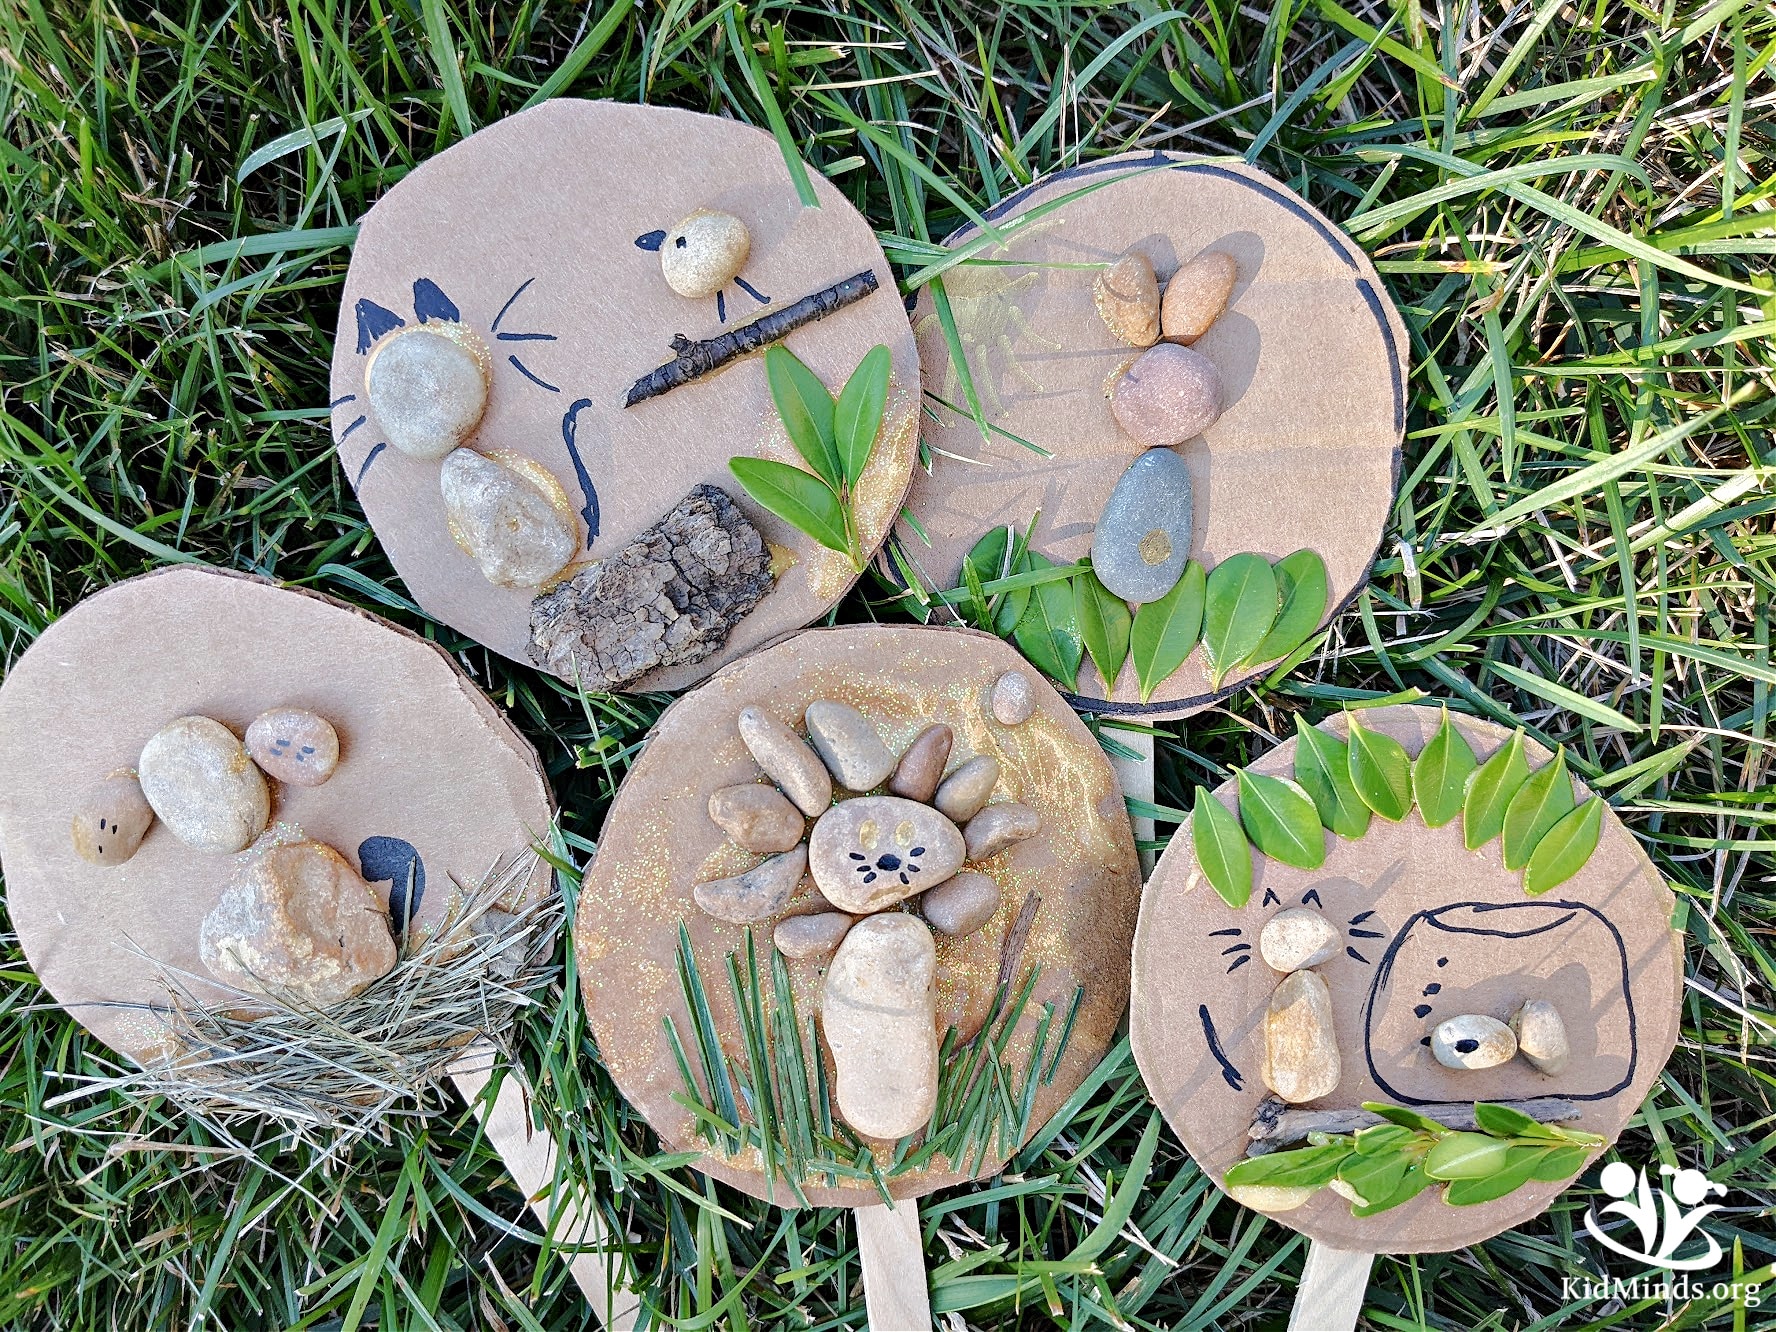 These cute pebble puppets are fun to make and cultivate wonderful make-believe play. Use them to help act out stories, sing songs, and bring along for portable car entertainment.  #kidsactivities #kidminds #kids #earlylearning #homeschool #parenting #kidsfun #playandlearn #creativekids #invitationtoplay